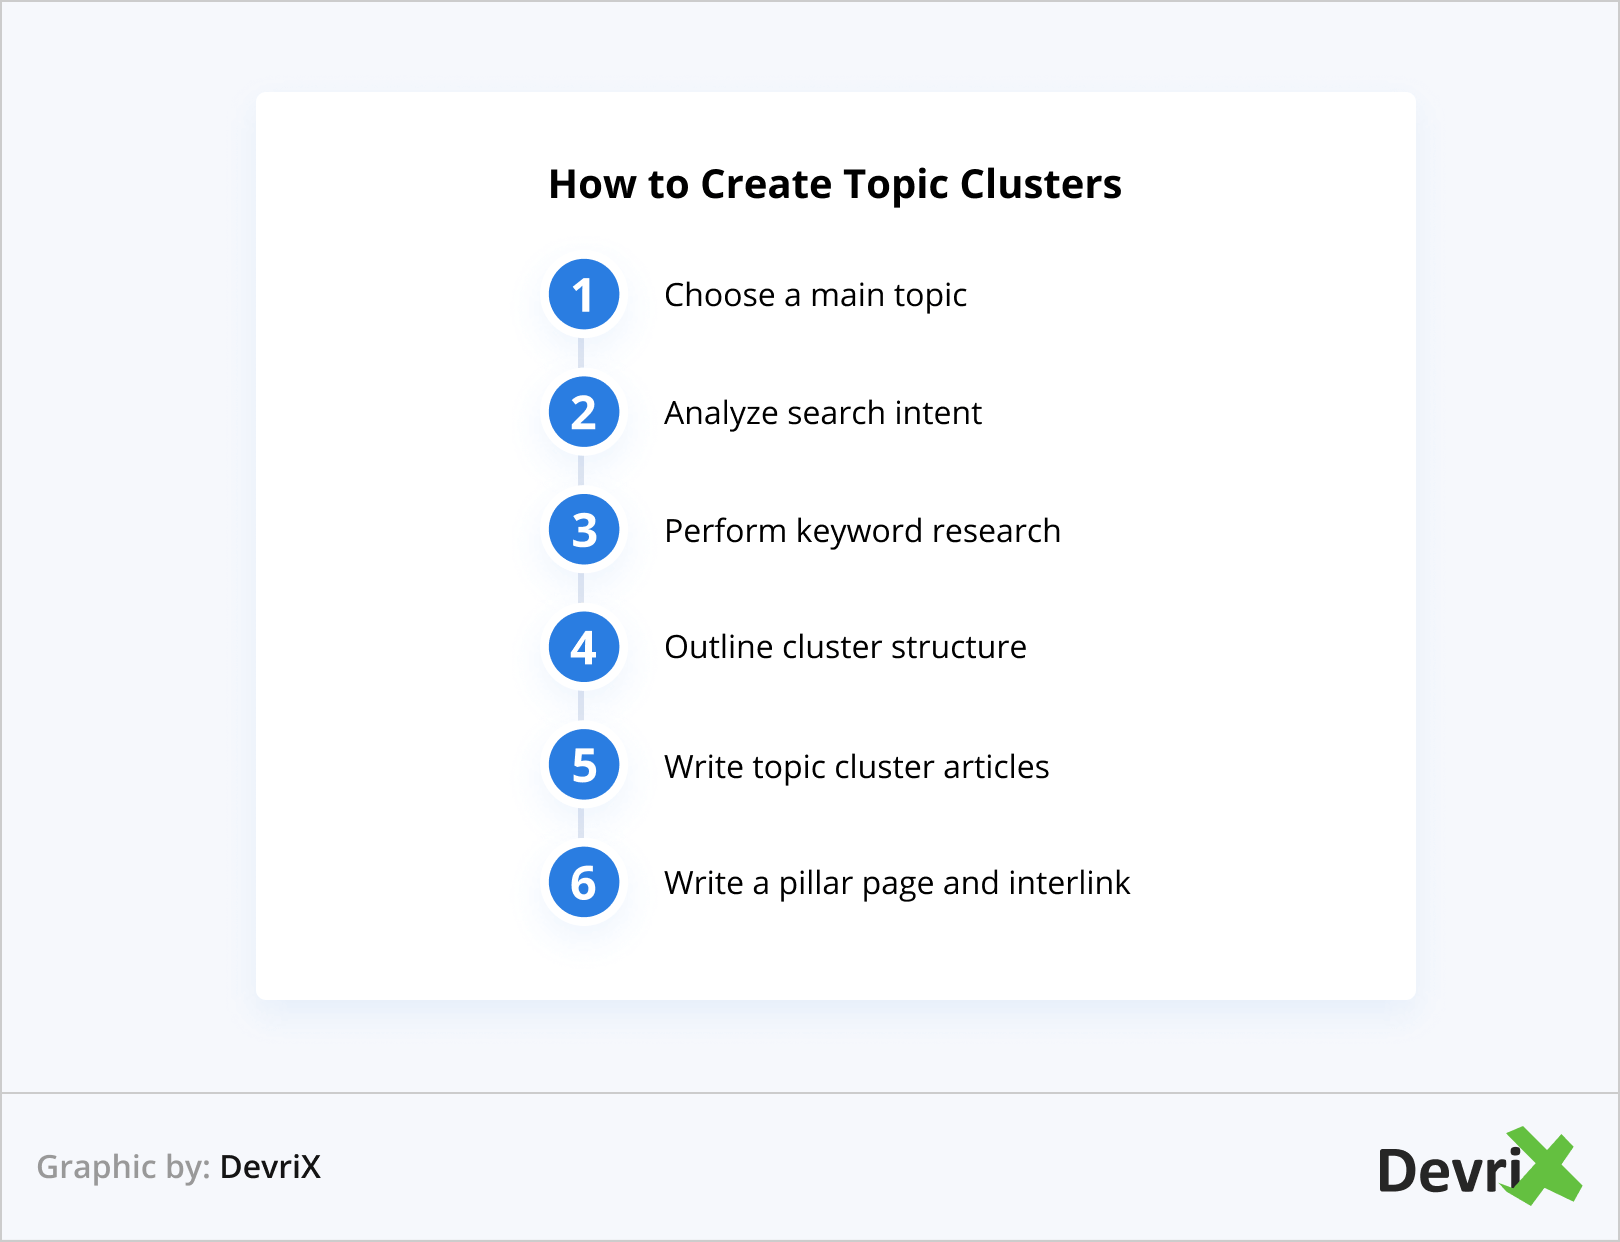 How to Create Topic Clusters